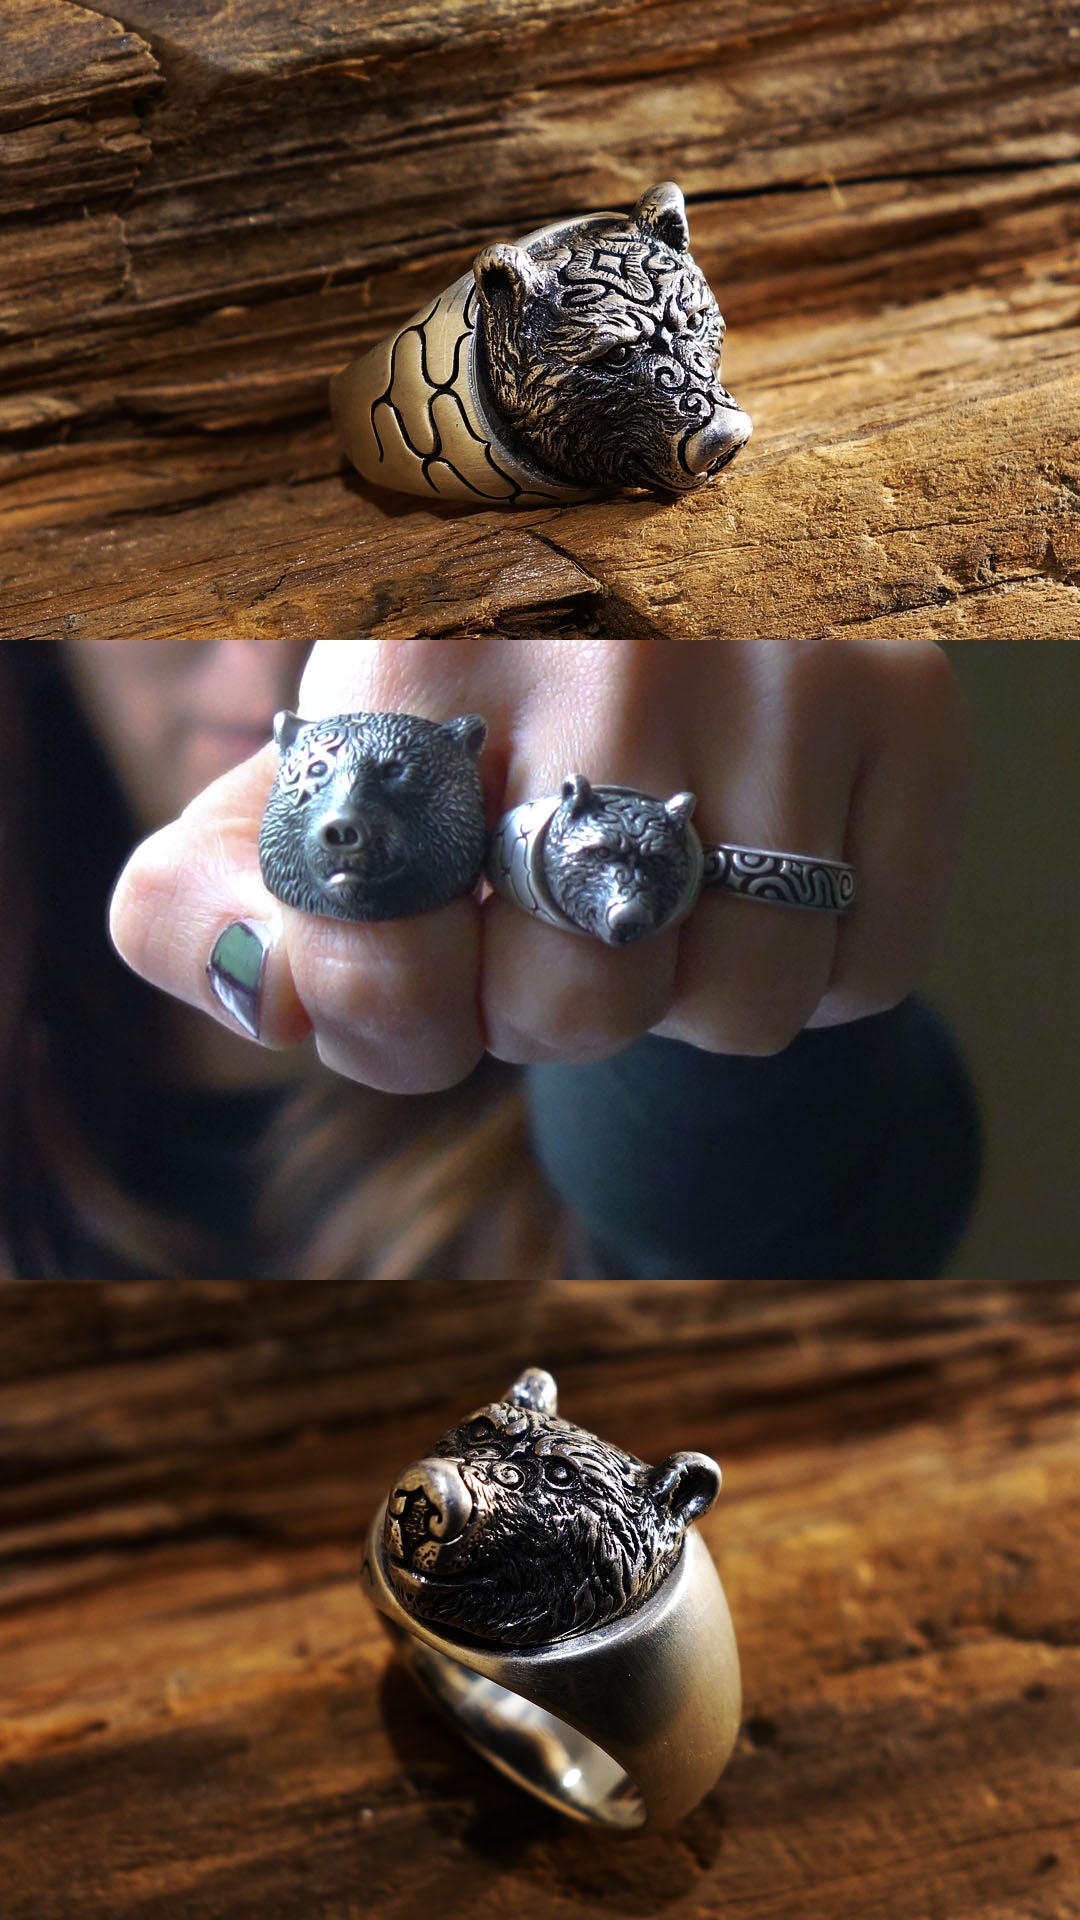 Little bear ring with Ainu pattern